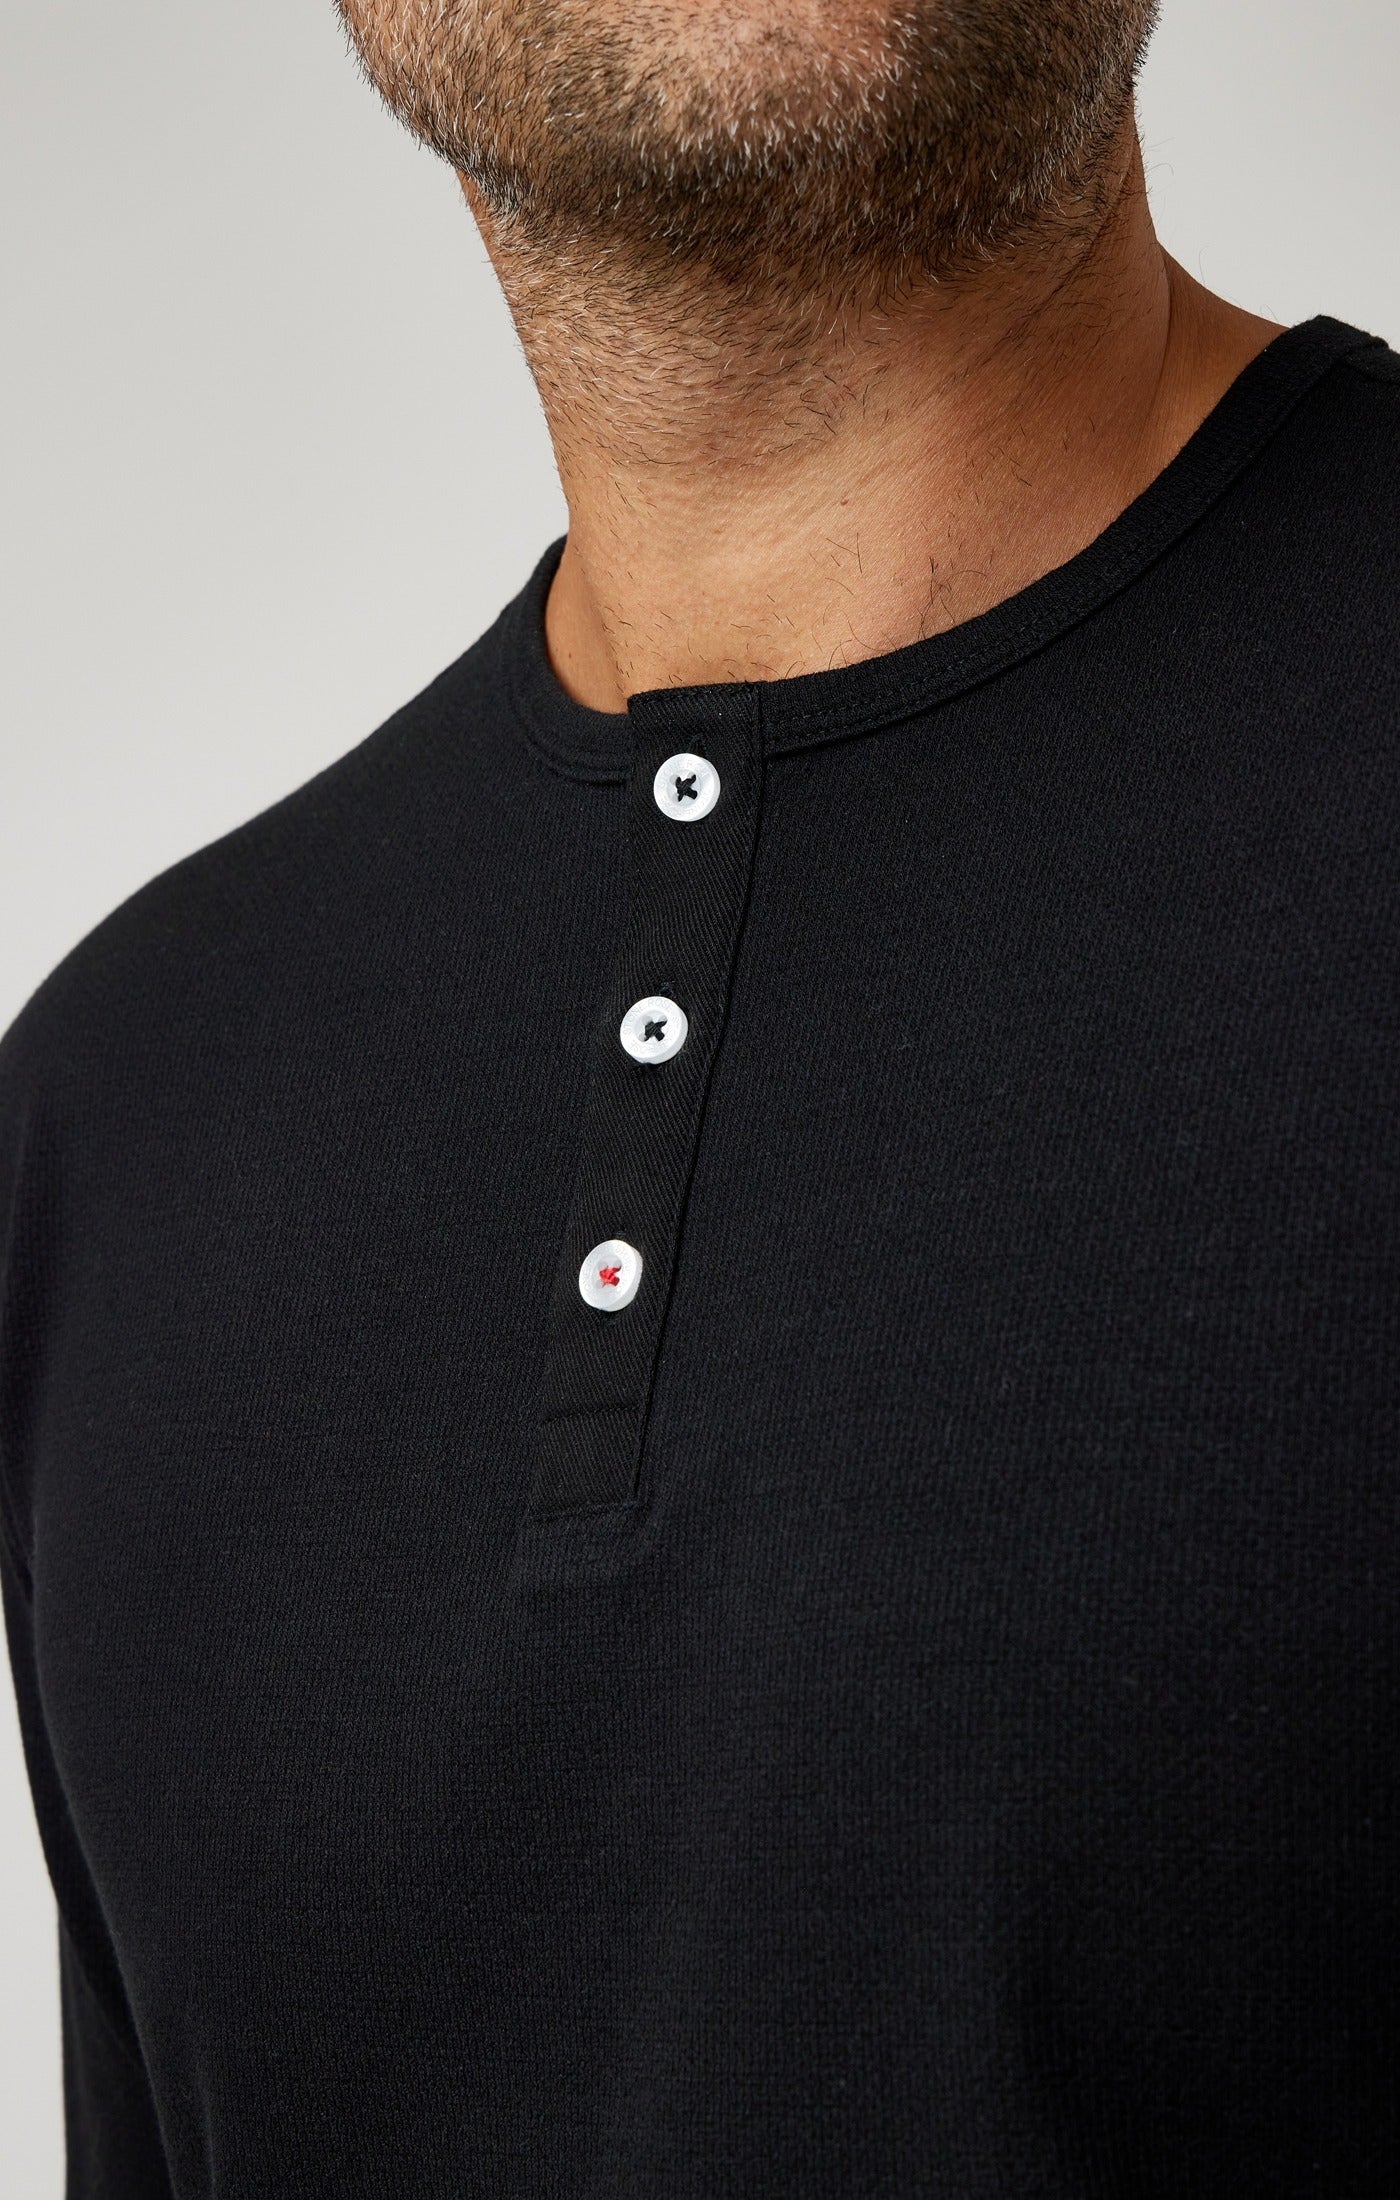 Black Solid 3 Buttons Henley